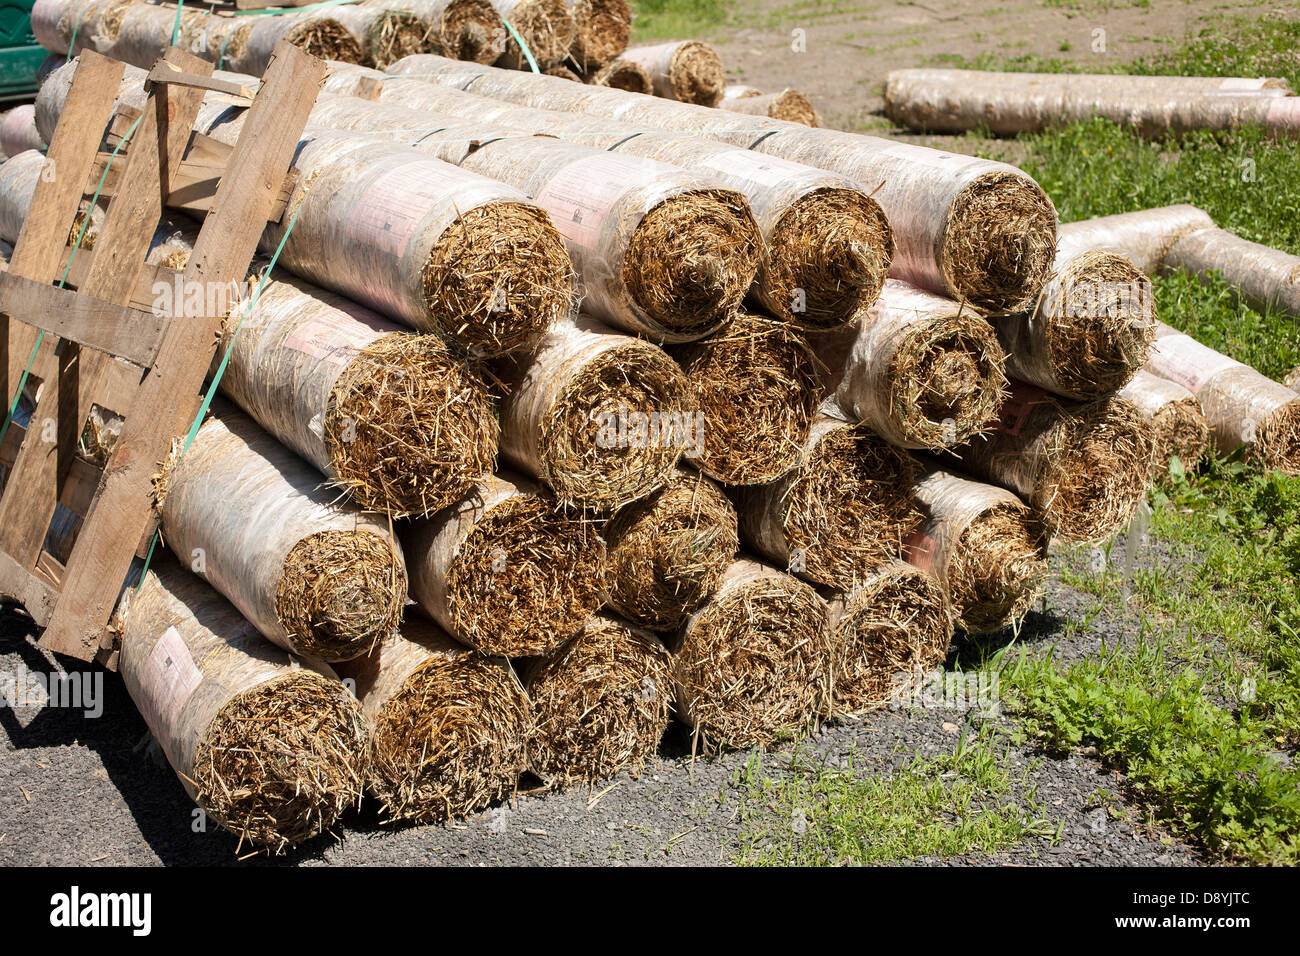 Straw erosion control blankets are rolled up, waiting to be spread on the construction site to reduce erosion before grass grows Stock Photo